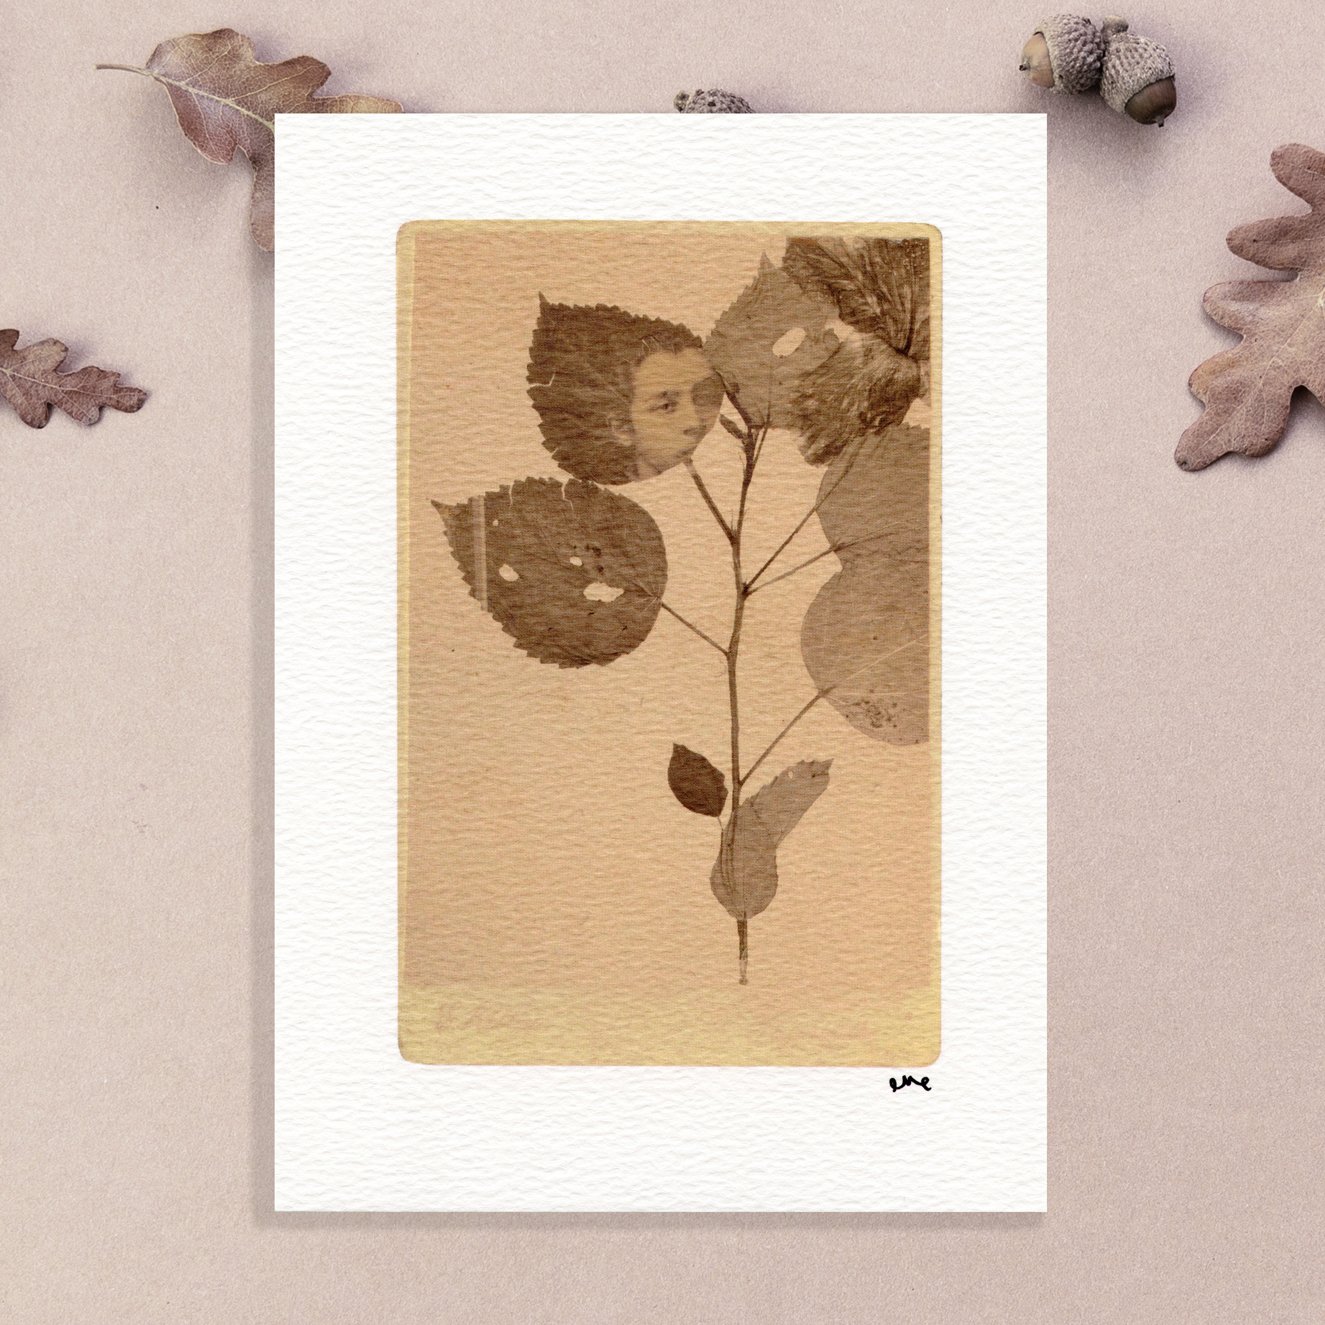 Eve-Illustration-Print-Shop-Art-Print-a5-A-Rose-With-Thorns-Square.jpg